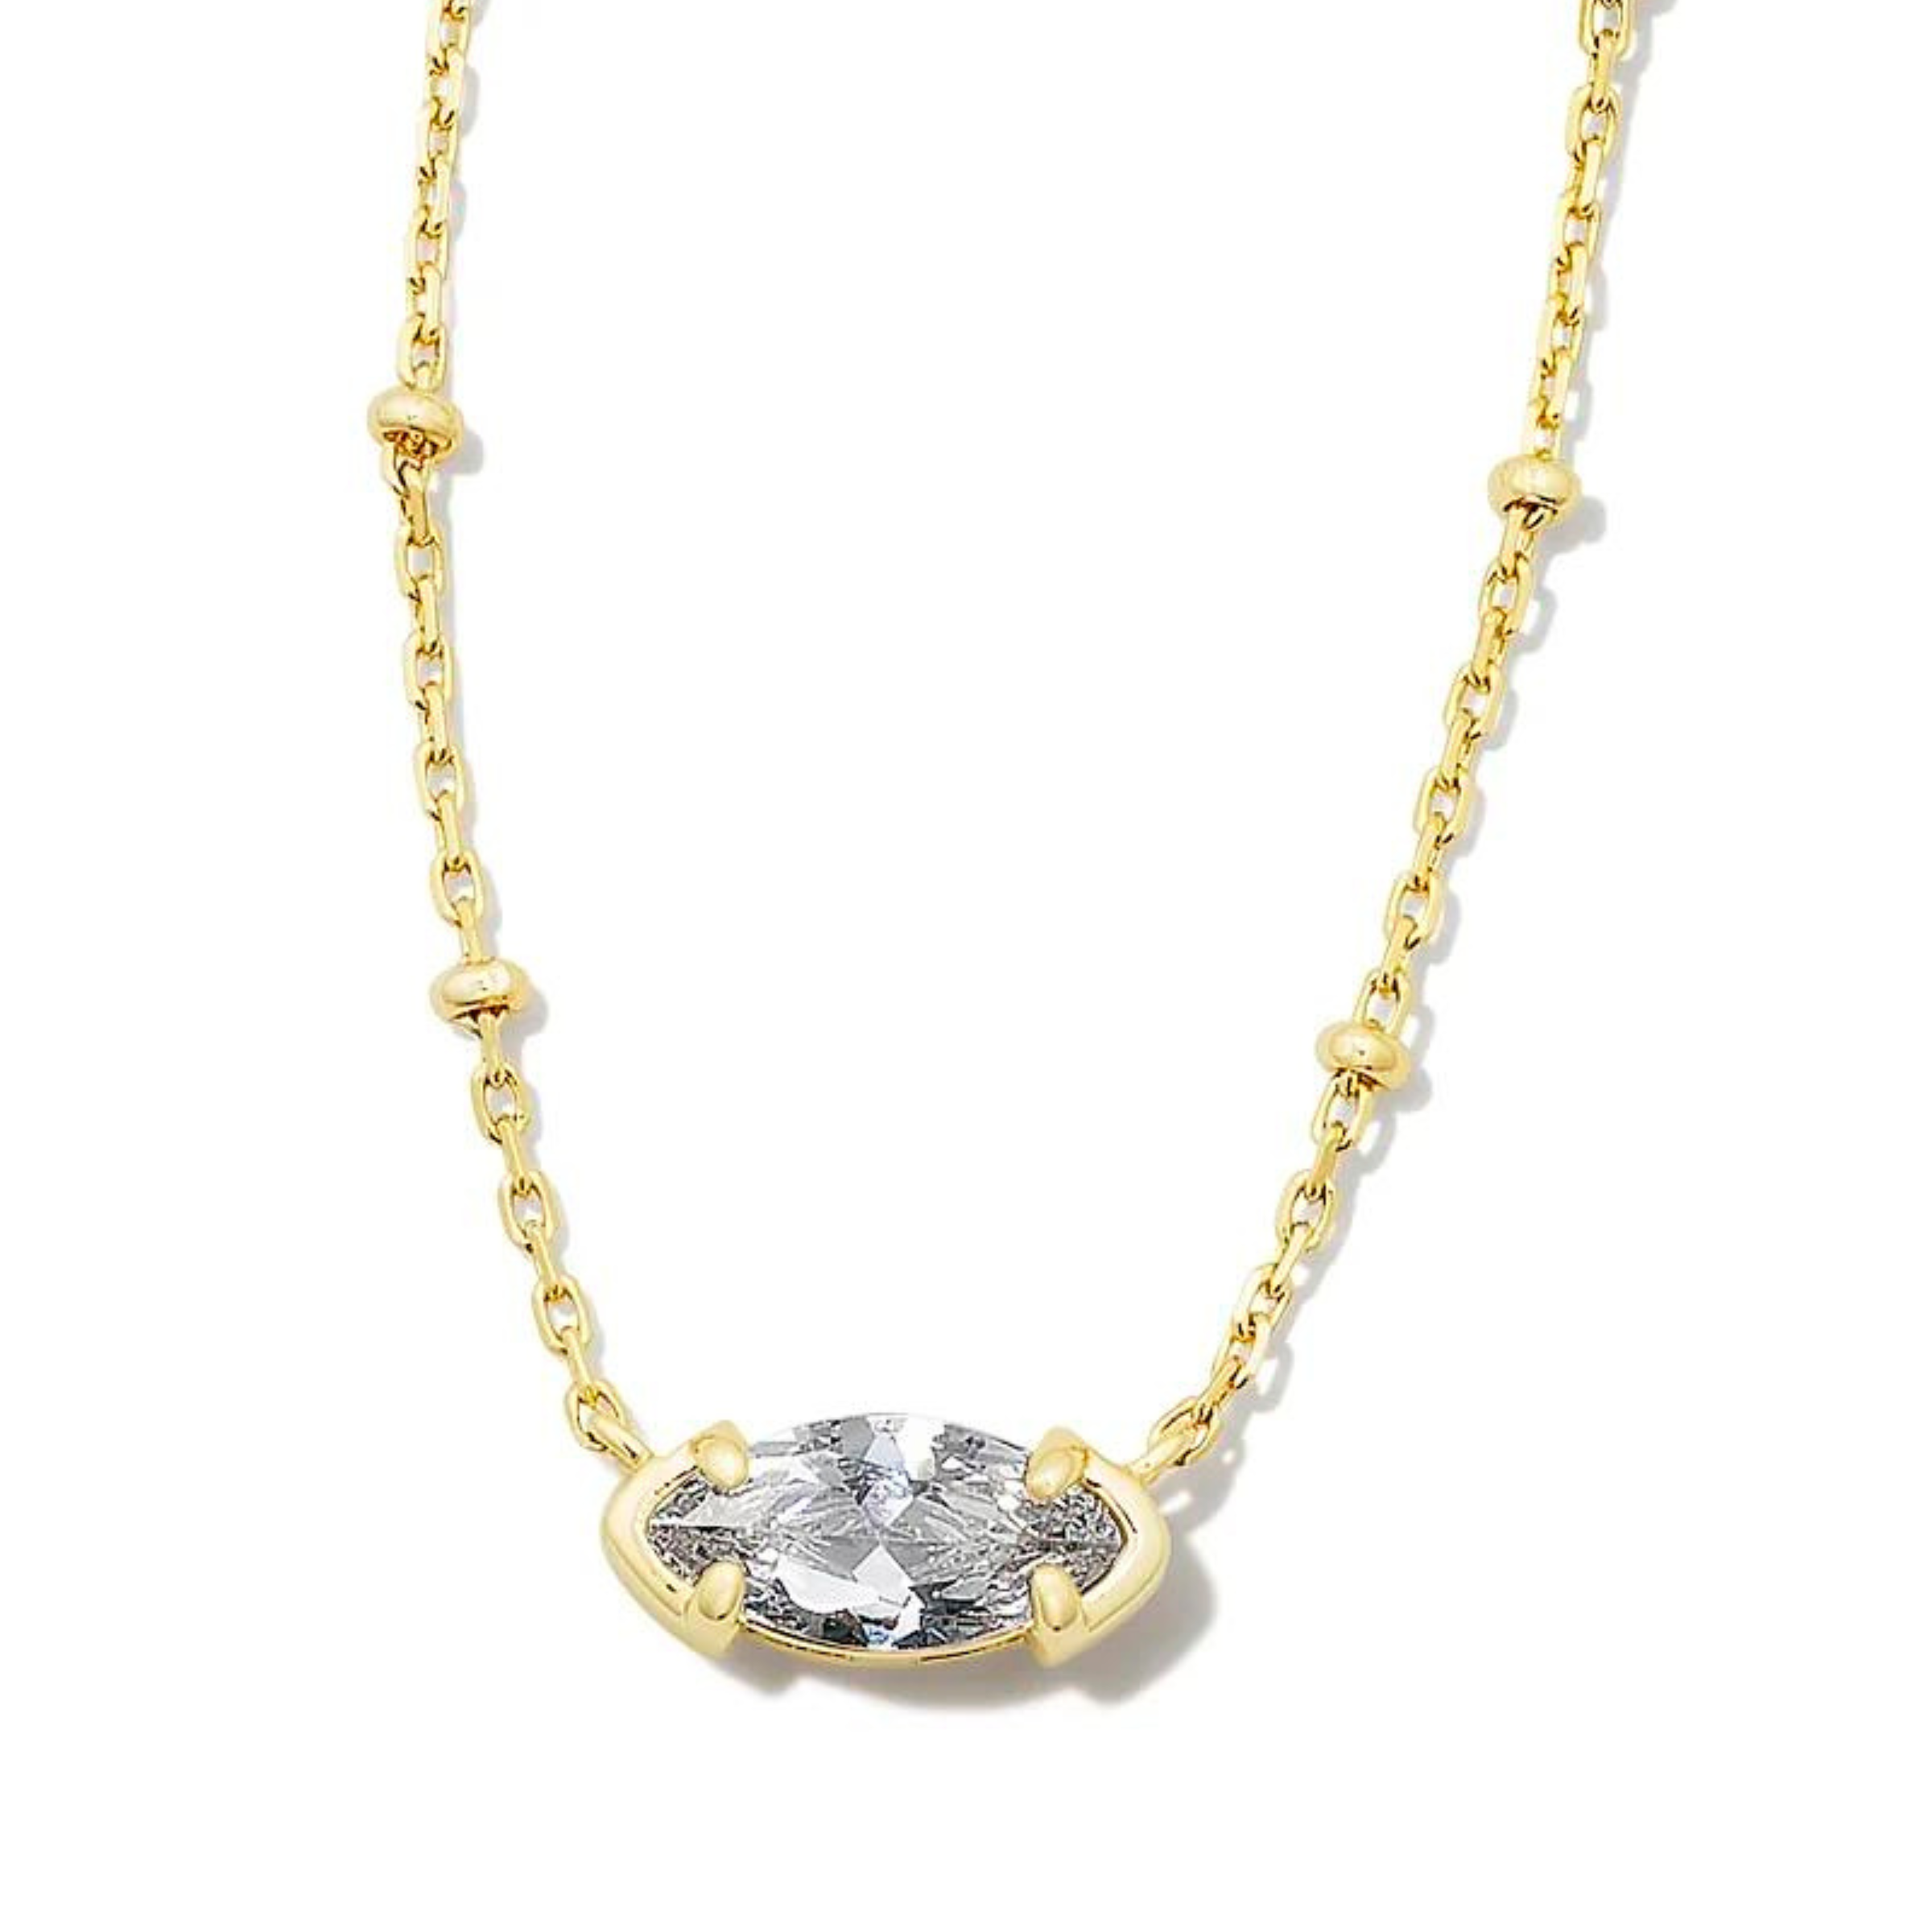 Gold chain necklace with a clear crystal oval pendant. This necklace is pictured on a white background. 